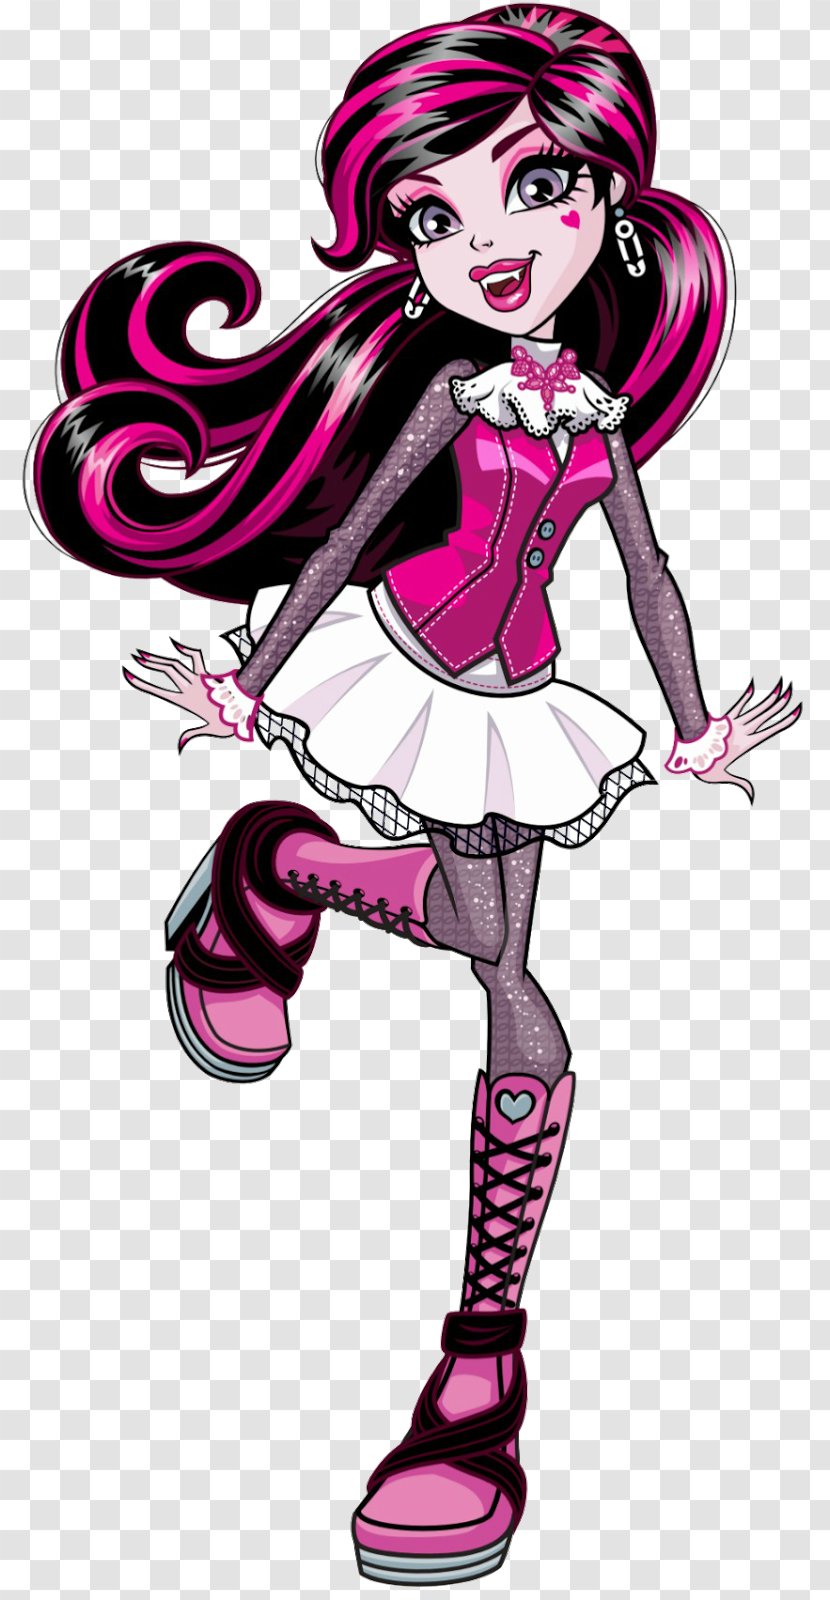 Frankie Stein Monster High Doll Barbie Toy - Silhouette Transparent PNG